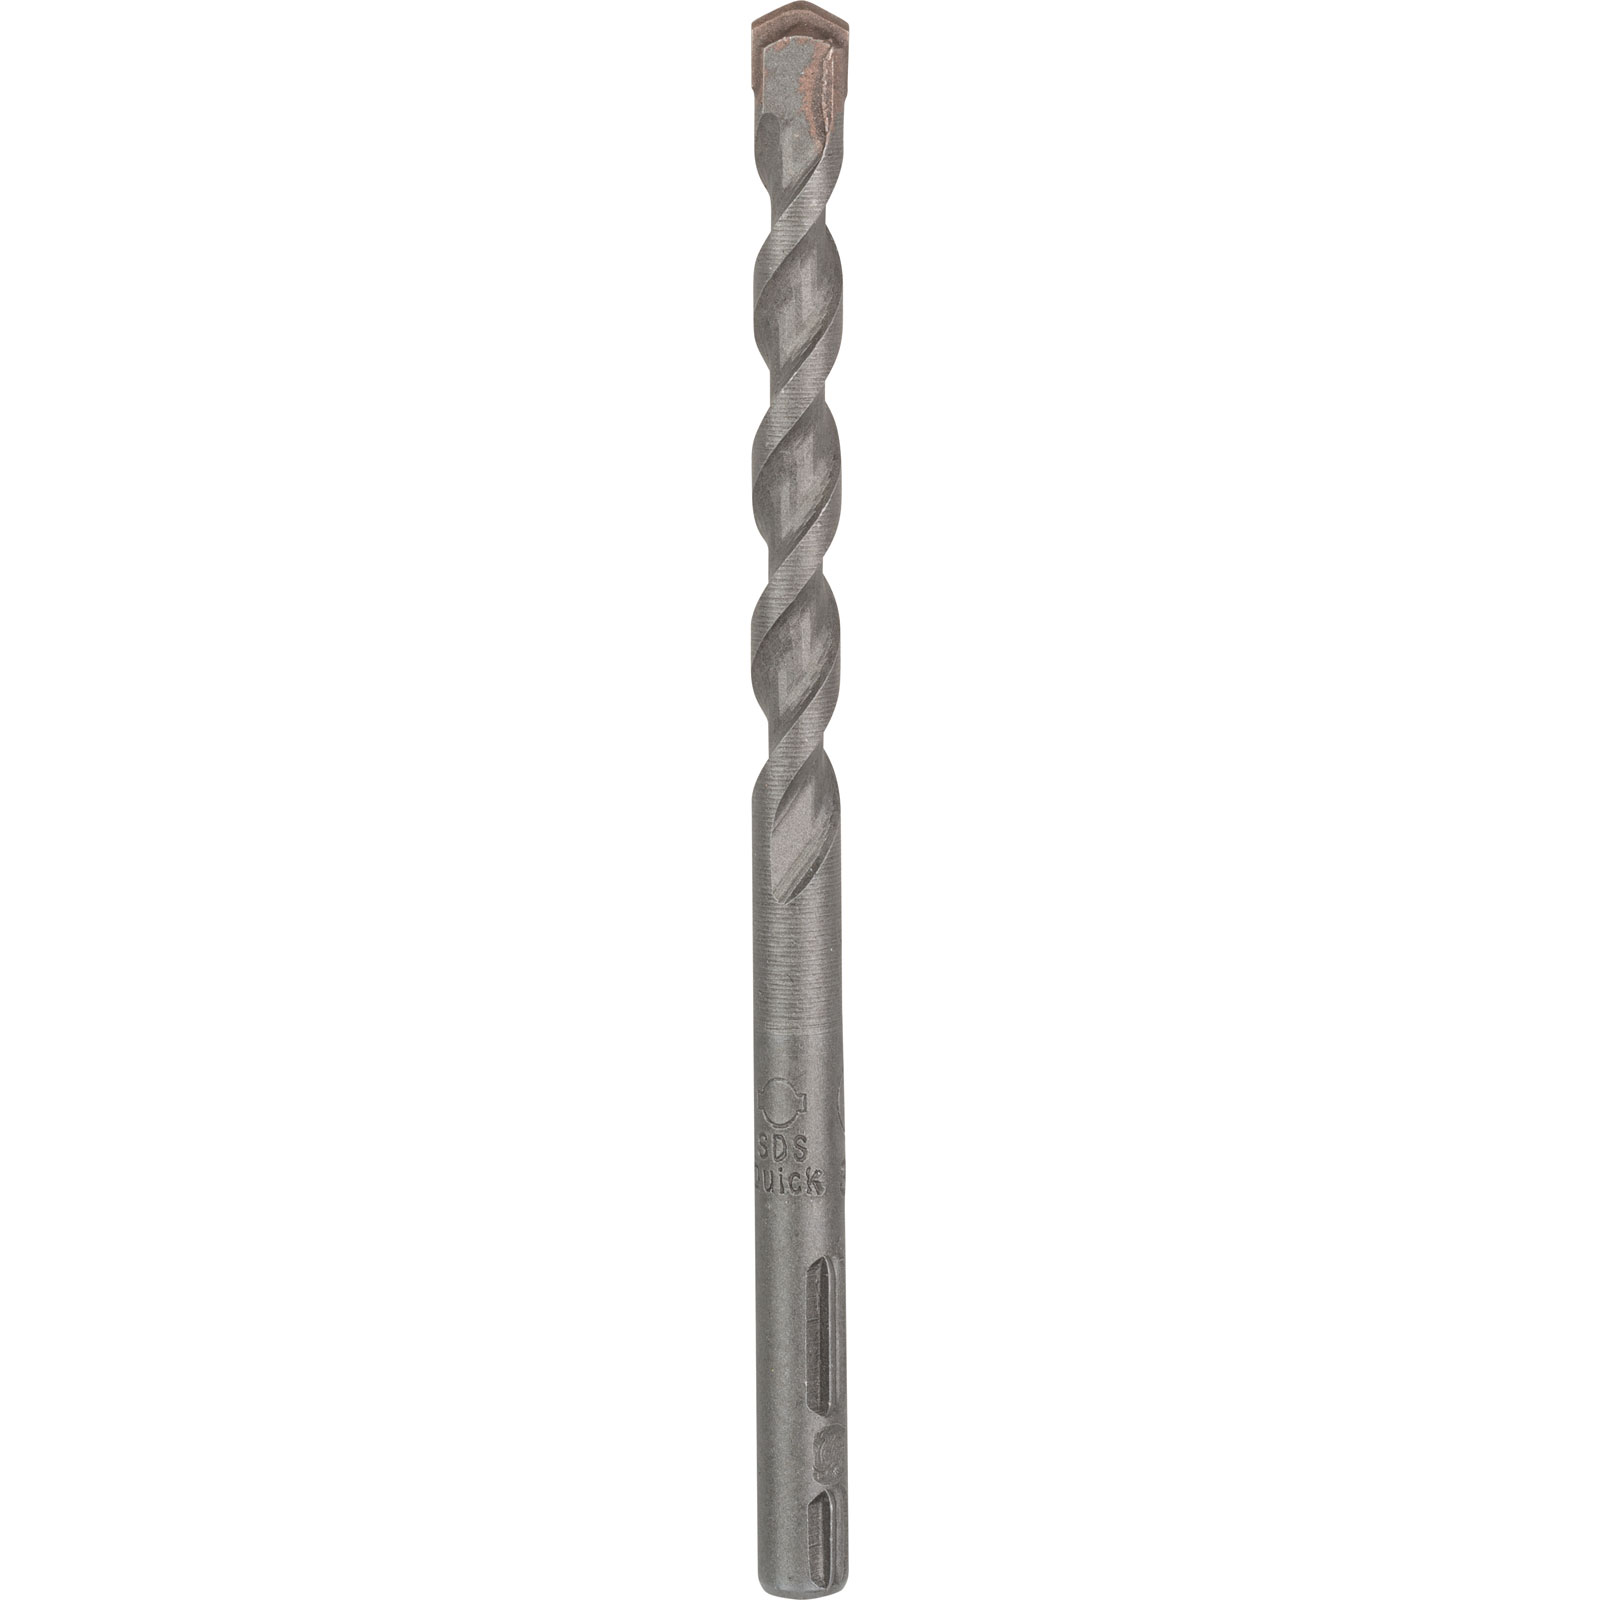 Photo of Bosch Uneo Sds Quick Masonary Drill Bit 7mm 100mm Pack Of 1